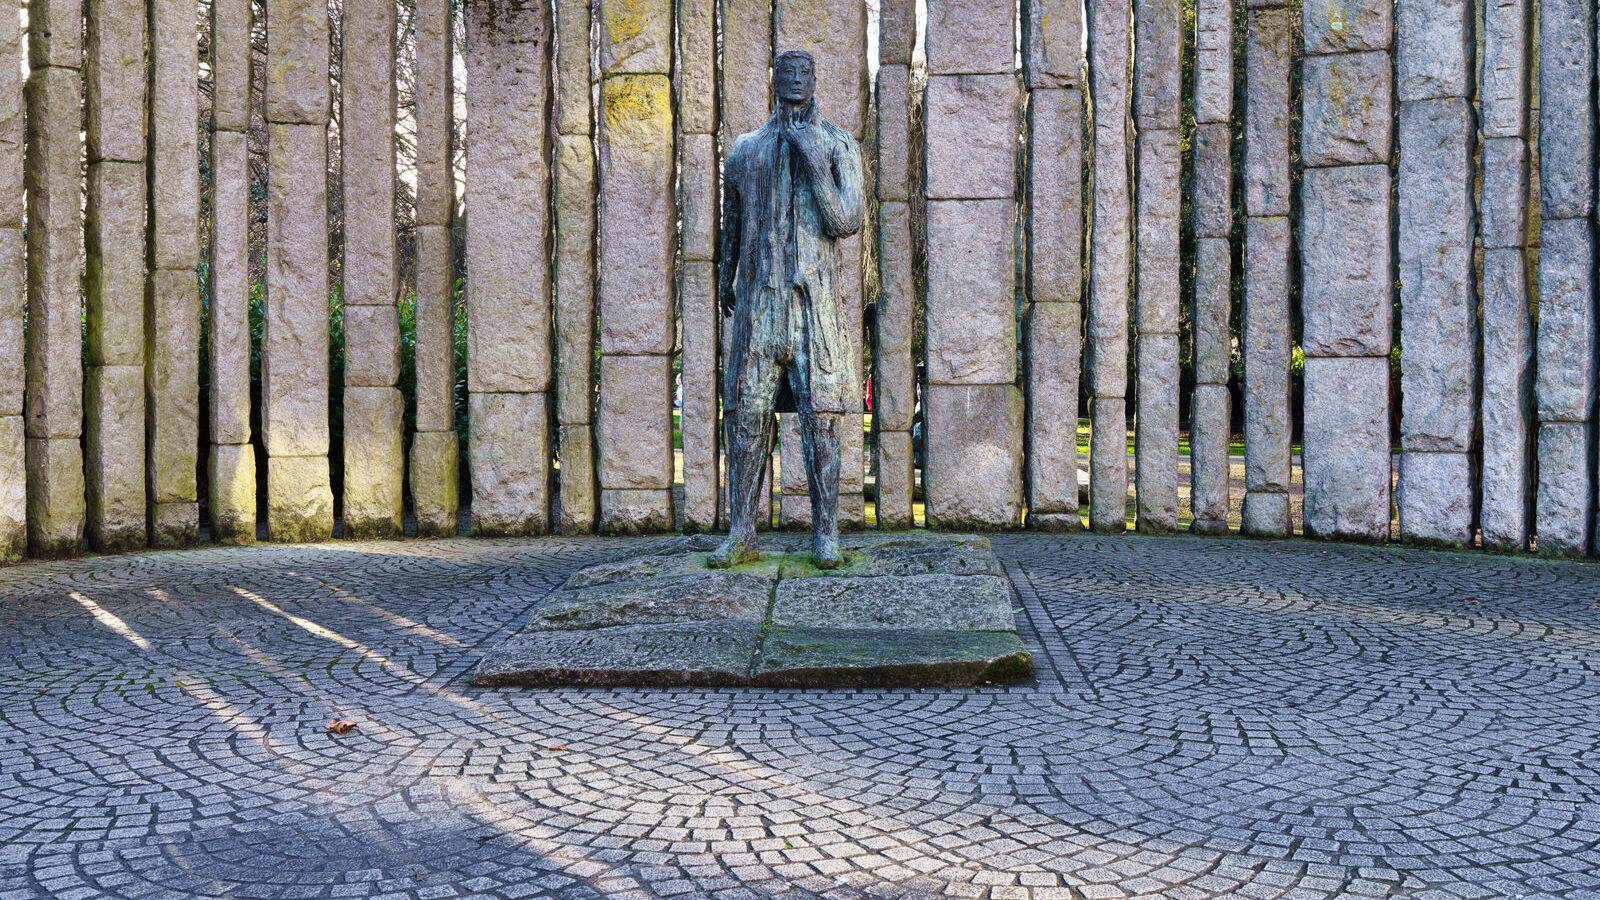 WOLFE TONE BY EDWARD DELANEY [I LIKE THE SETTING AT THE CORNER OF STEPHEN'S GREEN]-228101-1